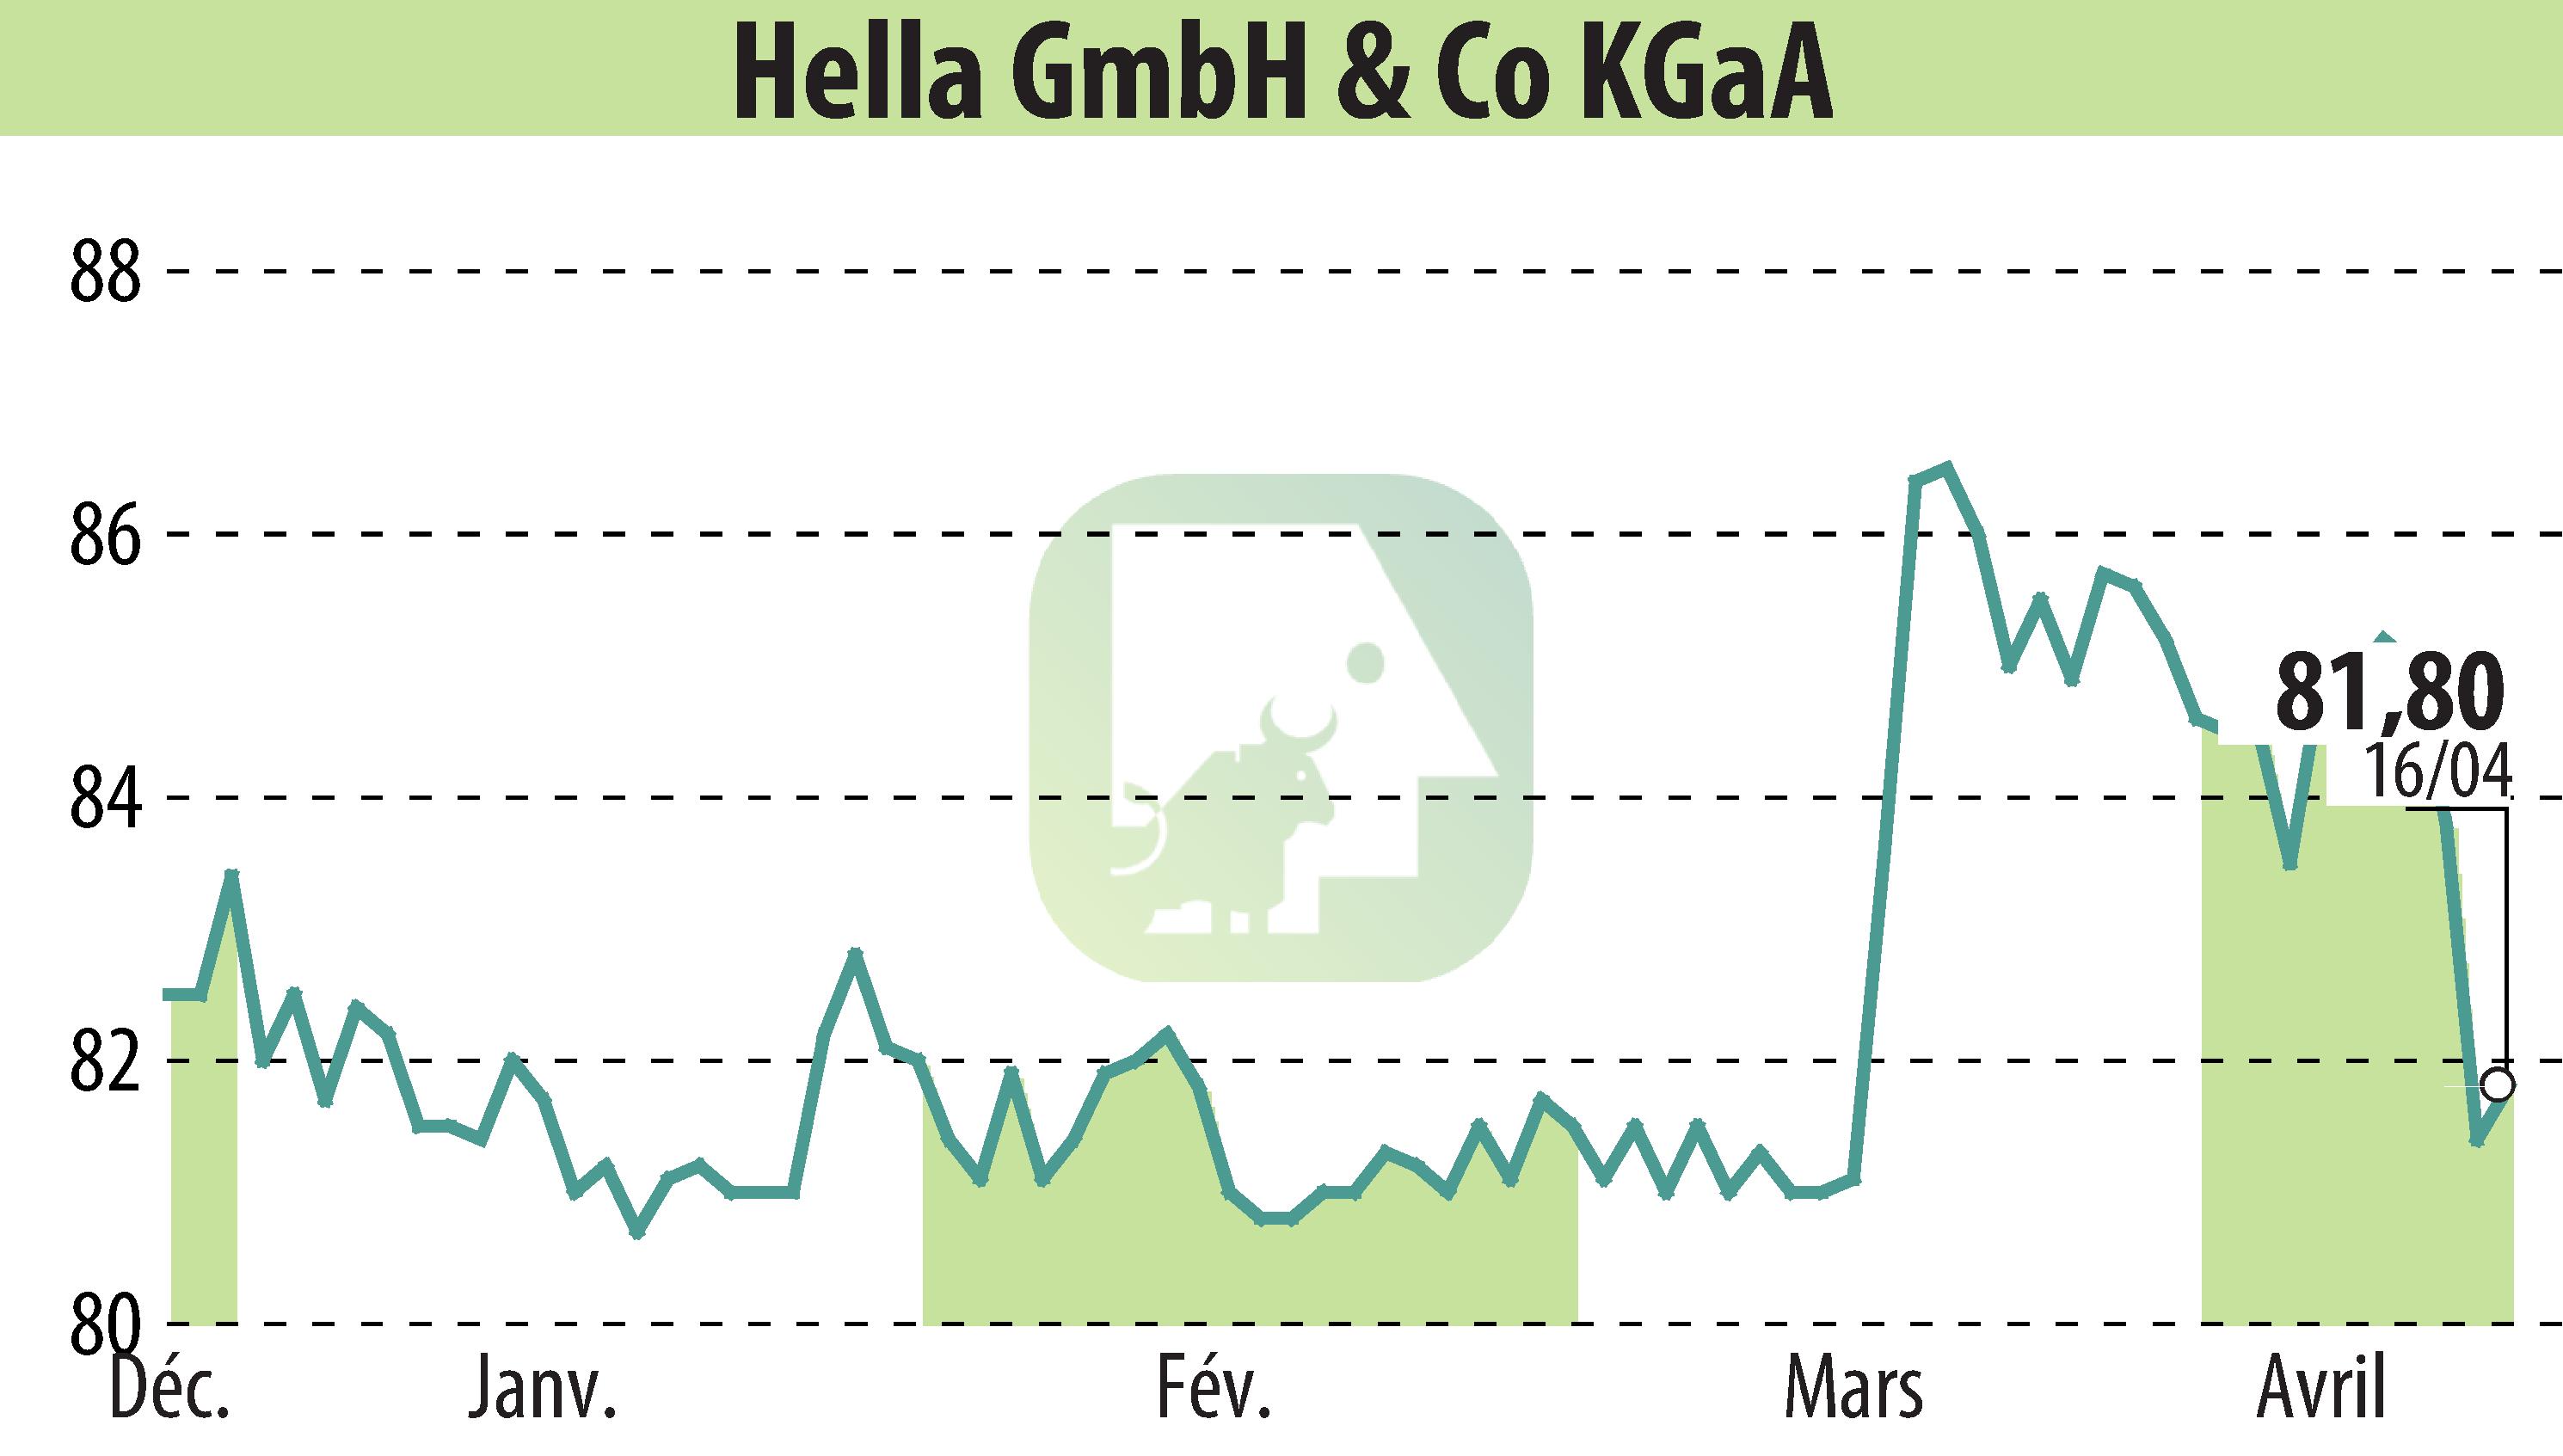 Stock price chart of HELLA GmbH & Co. KGaA (EBR:HLE) showing fluctuations.